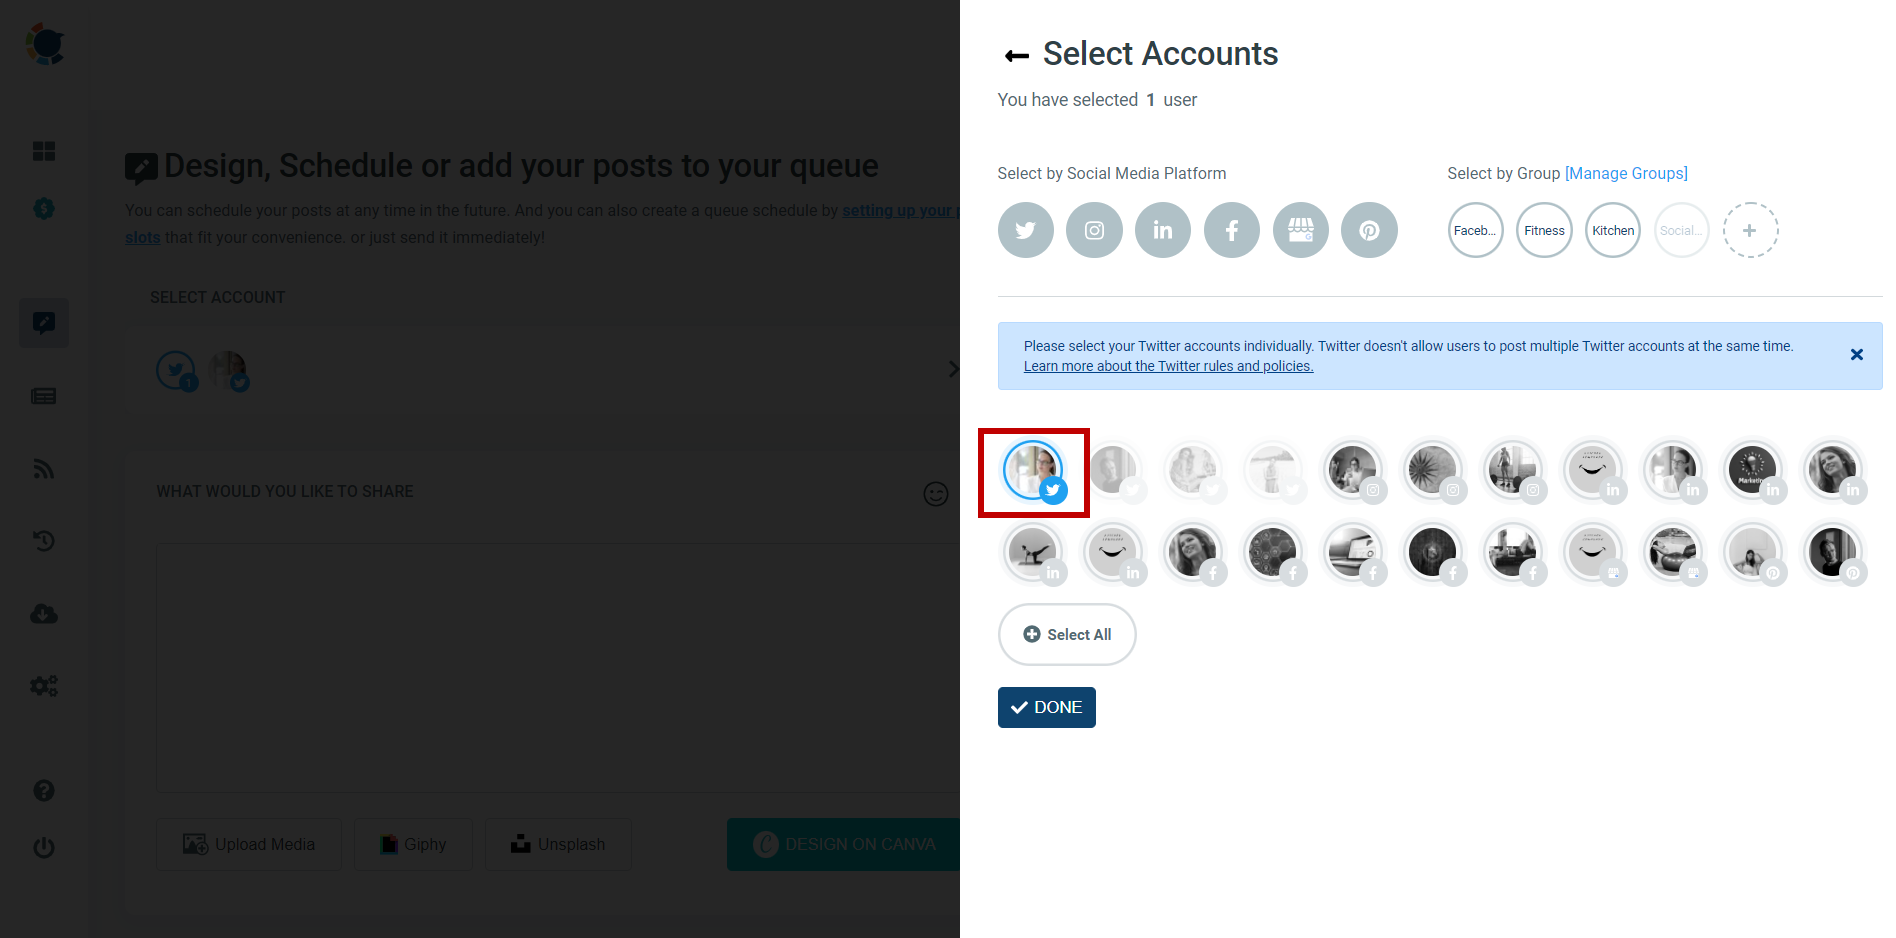 Connect and select your Twitter account to bulk schedule your tweets in advance!